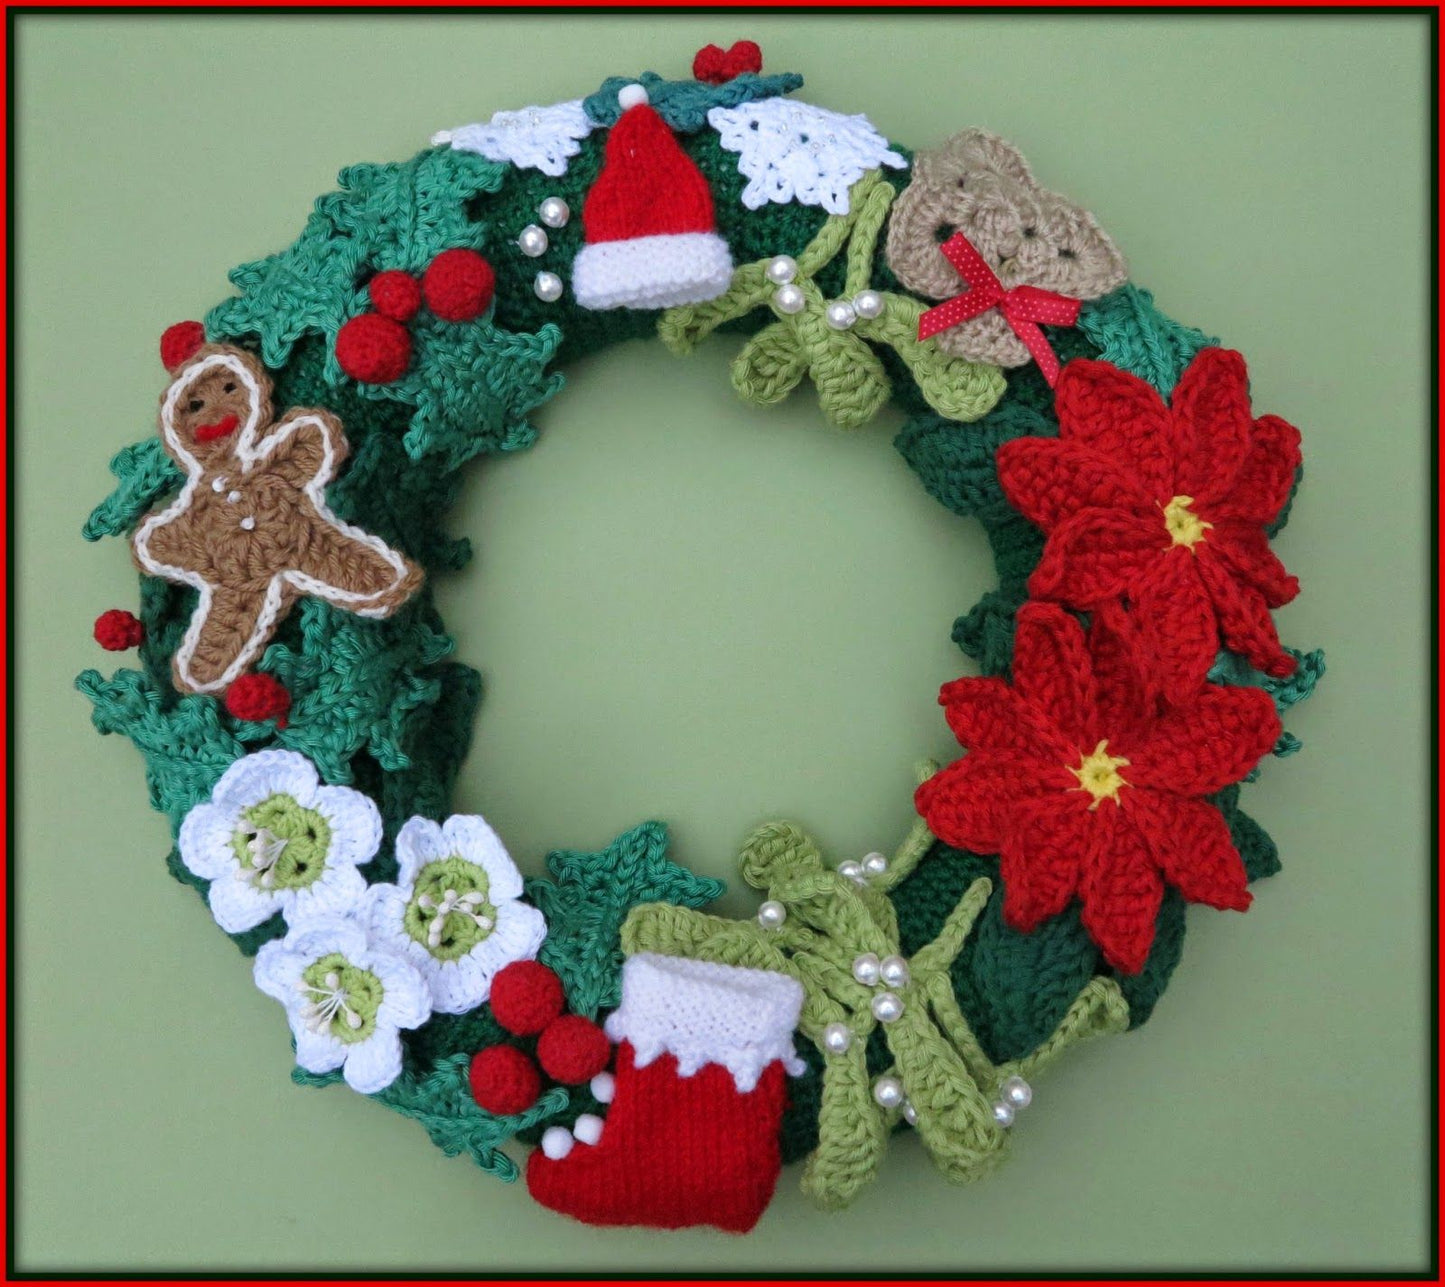 Knit or Crochet a Holiday Wreath